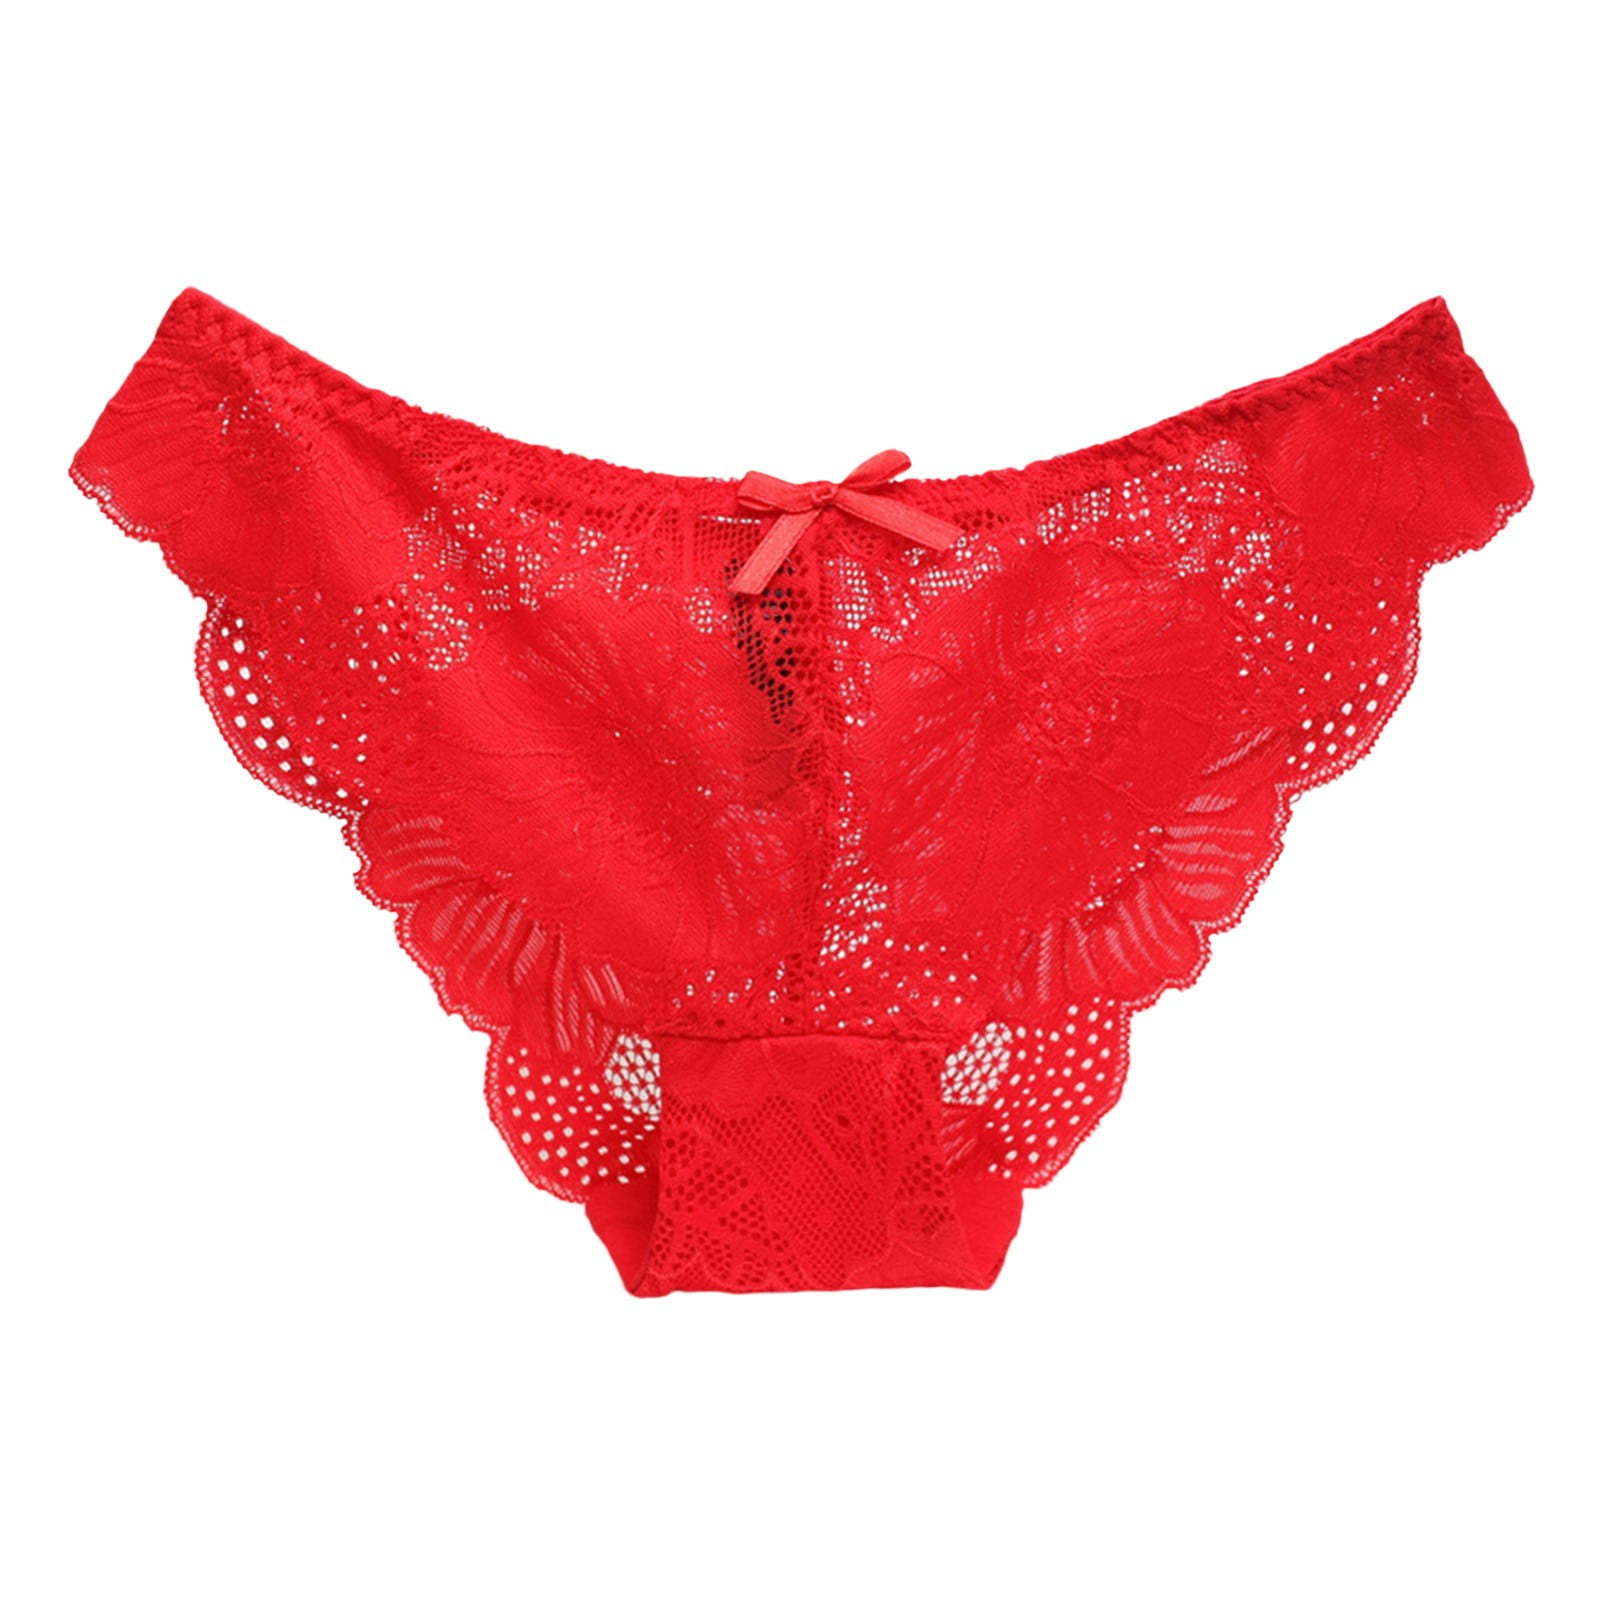 Brief panty, Red, Woman